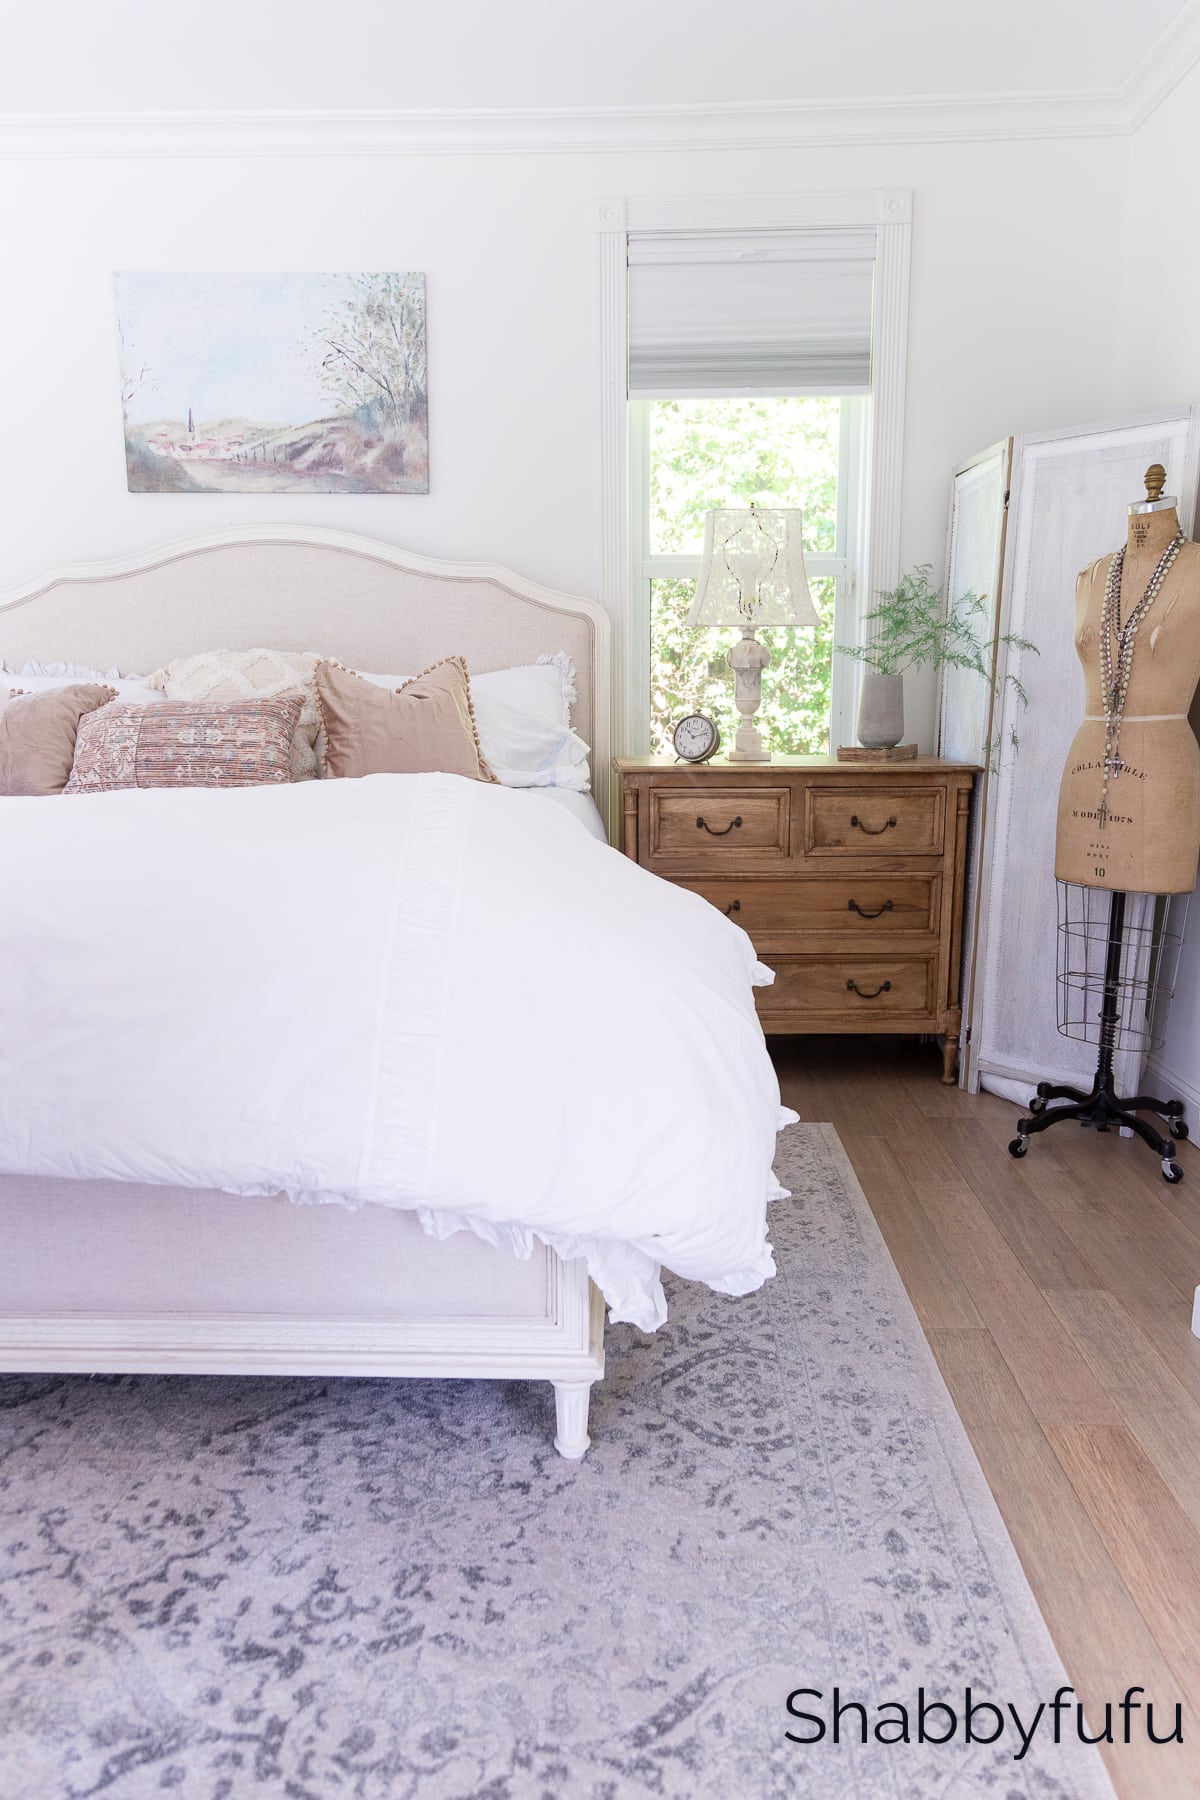 How To Make Your Bedroom Cozy – The Look For Less